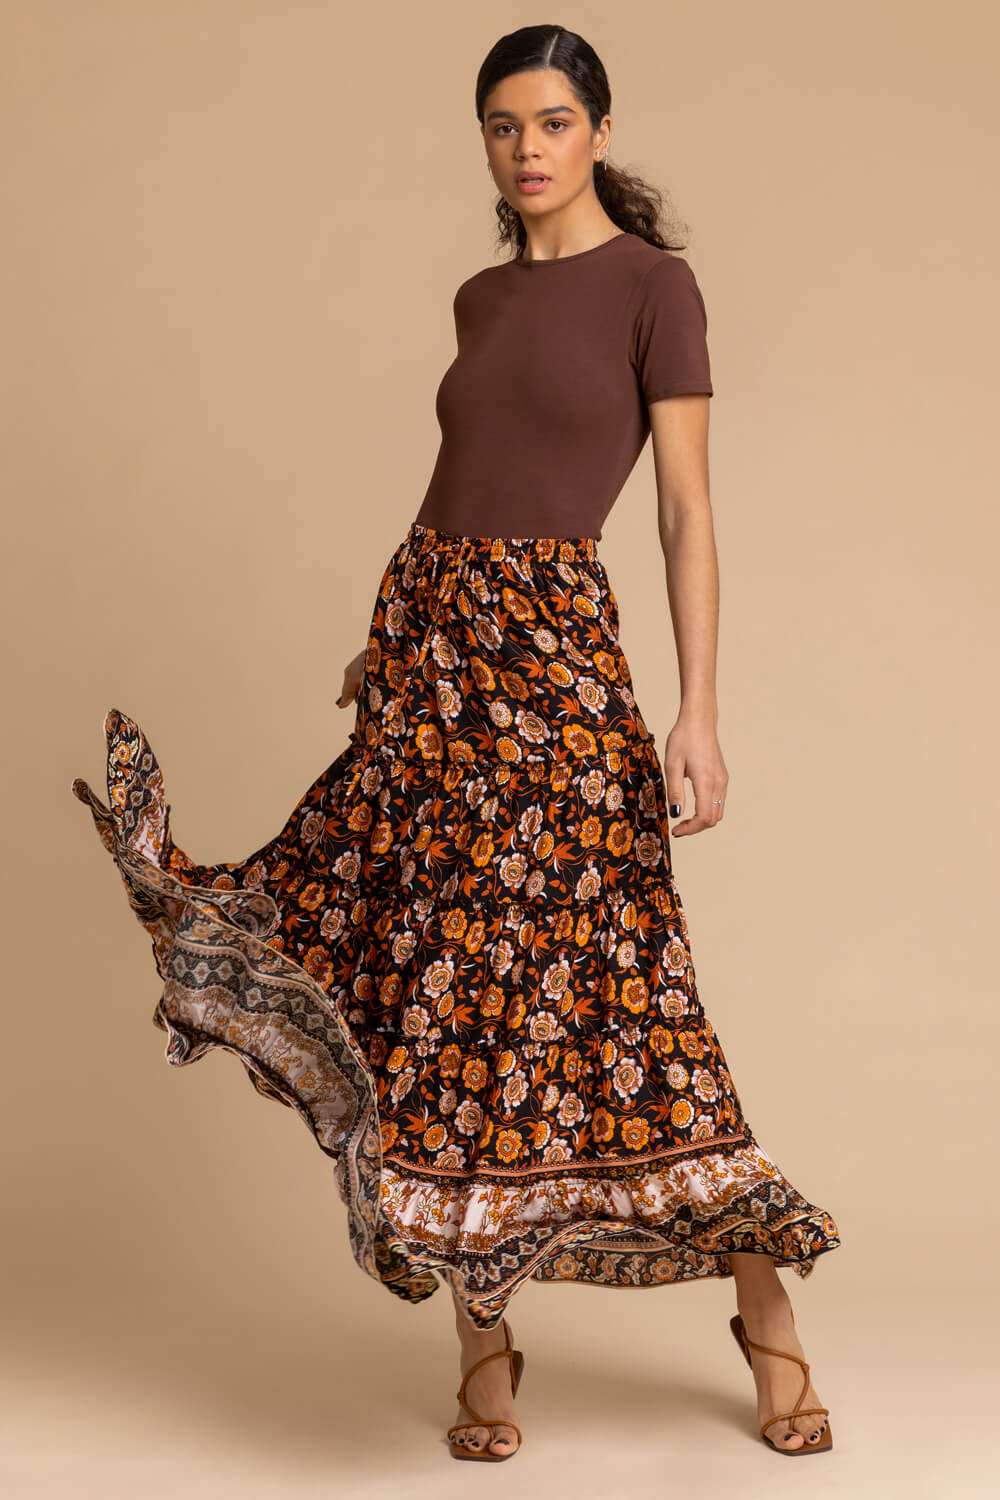 Black Floral Boho Print Tiered Maxi Skirt, Image 3 of 4